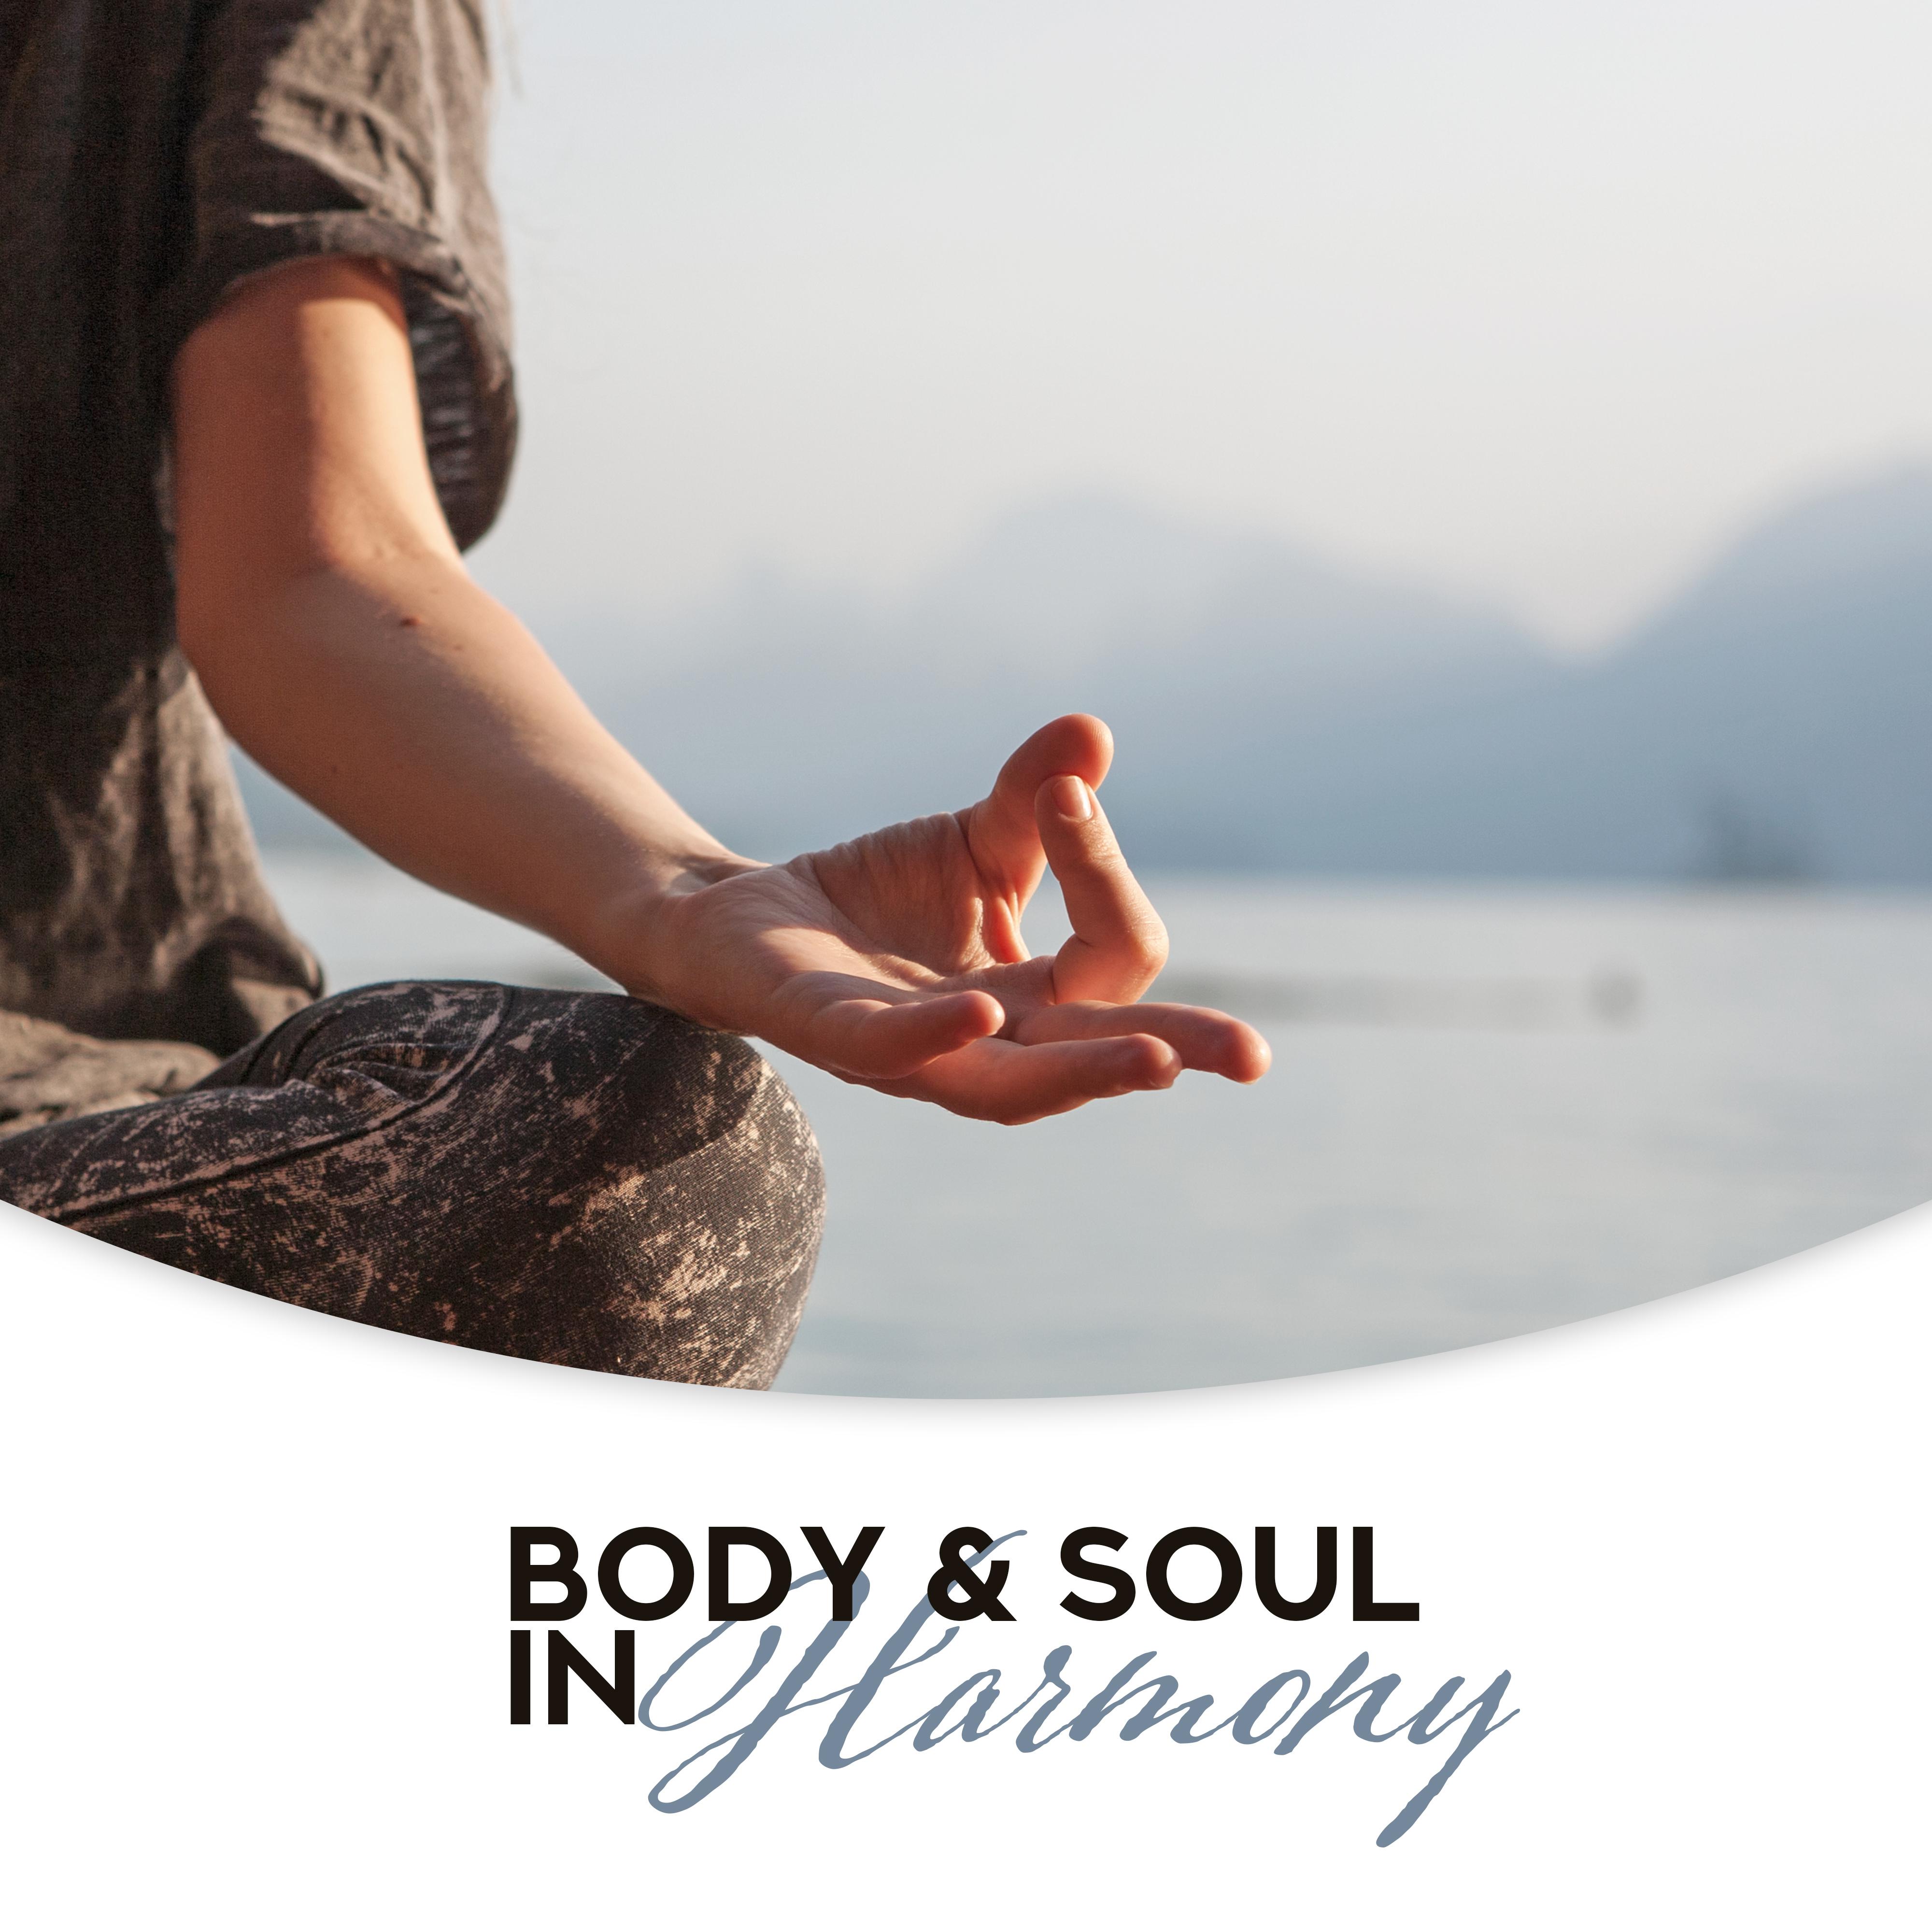 Body & Soul in Harmony: Compilation of 2019 Fresh New Age Music for Meditation & Relaxation, Zen Mindfulness Yoga, Mantra